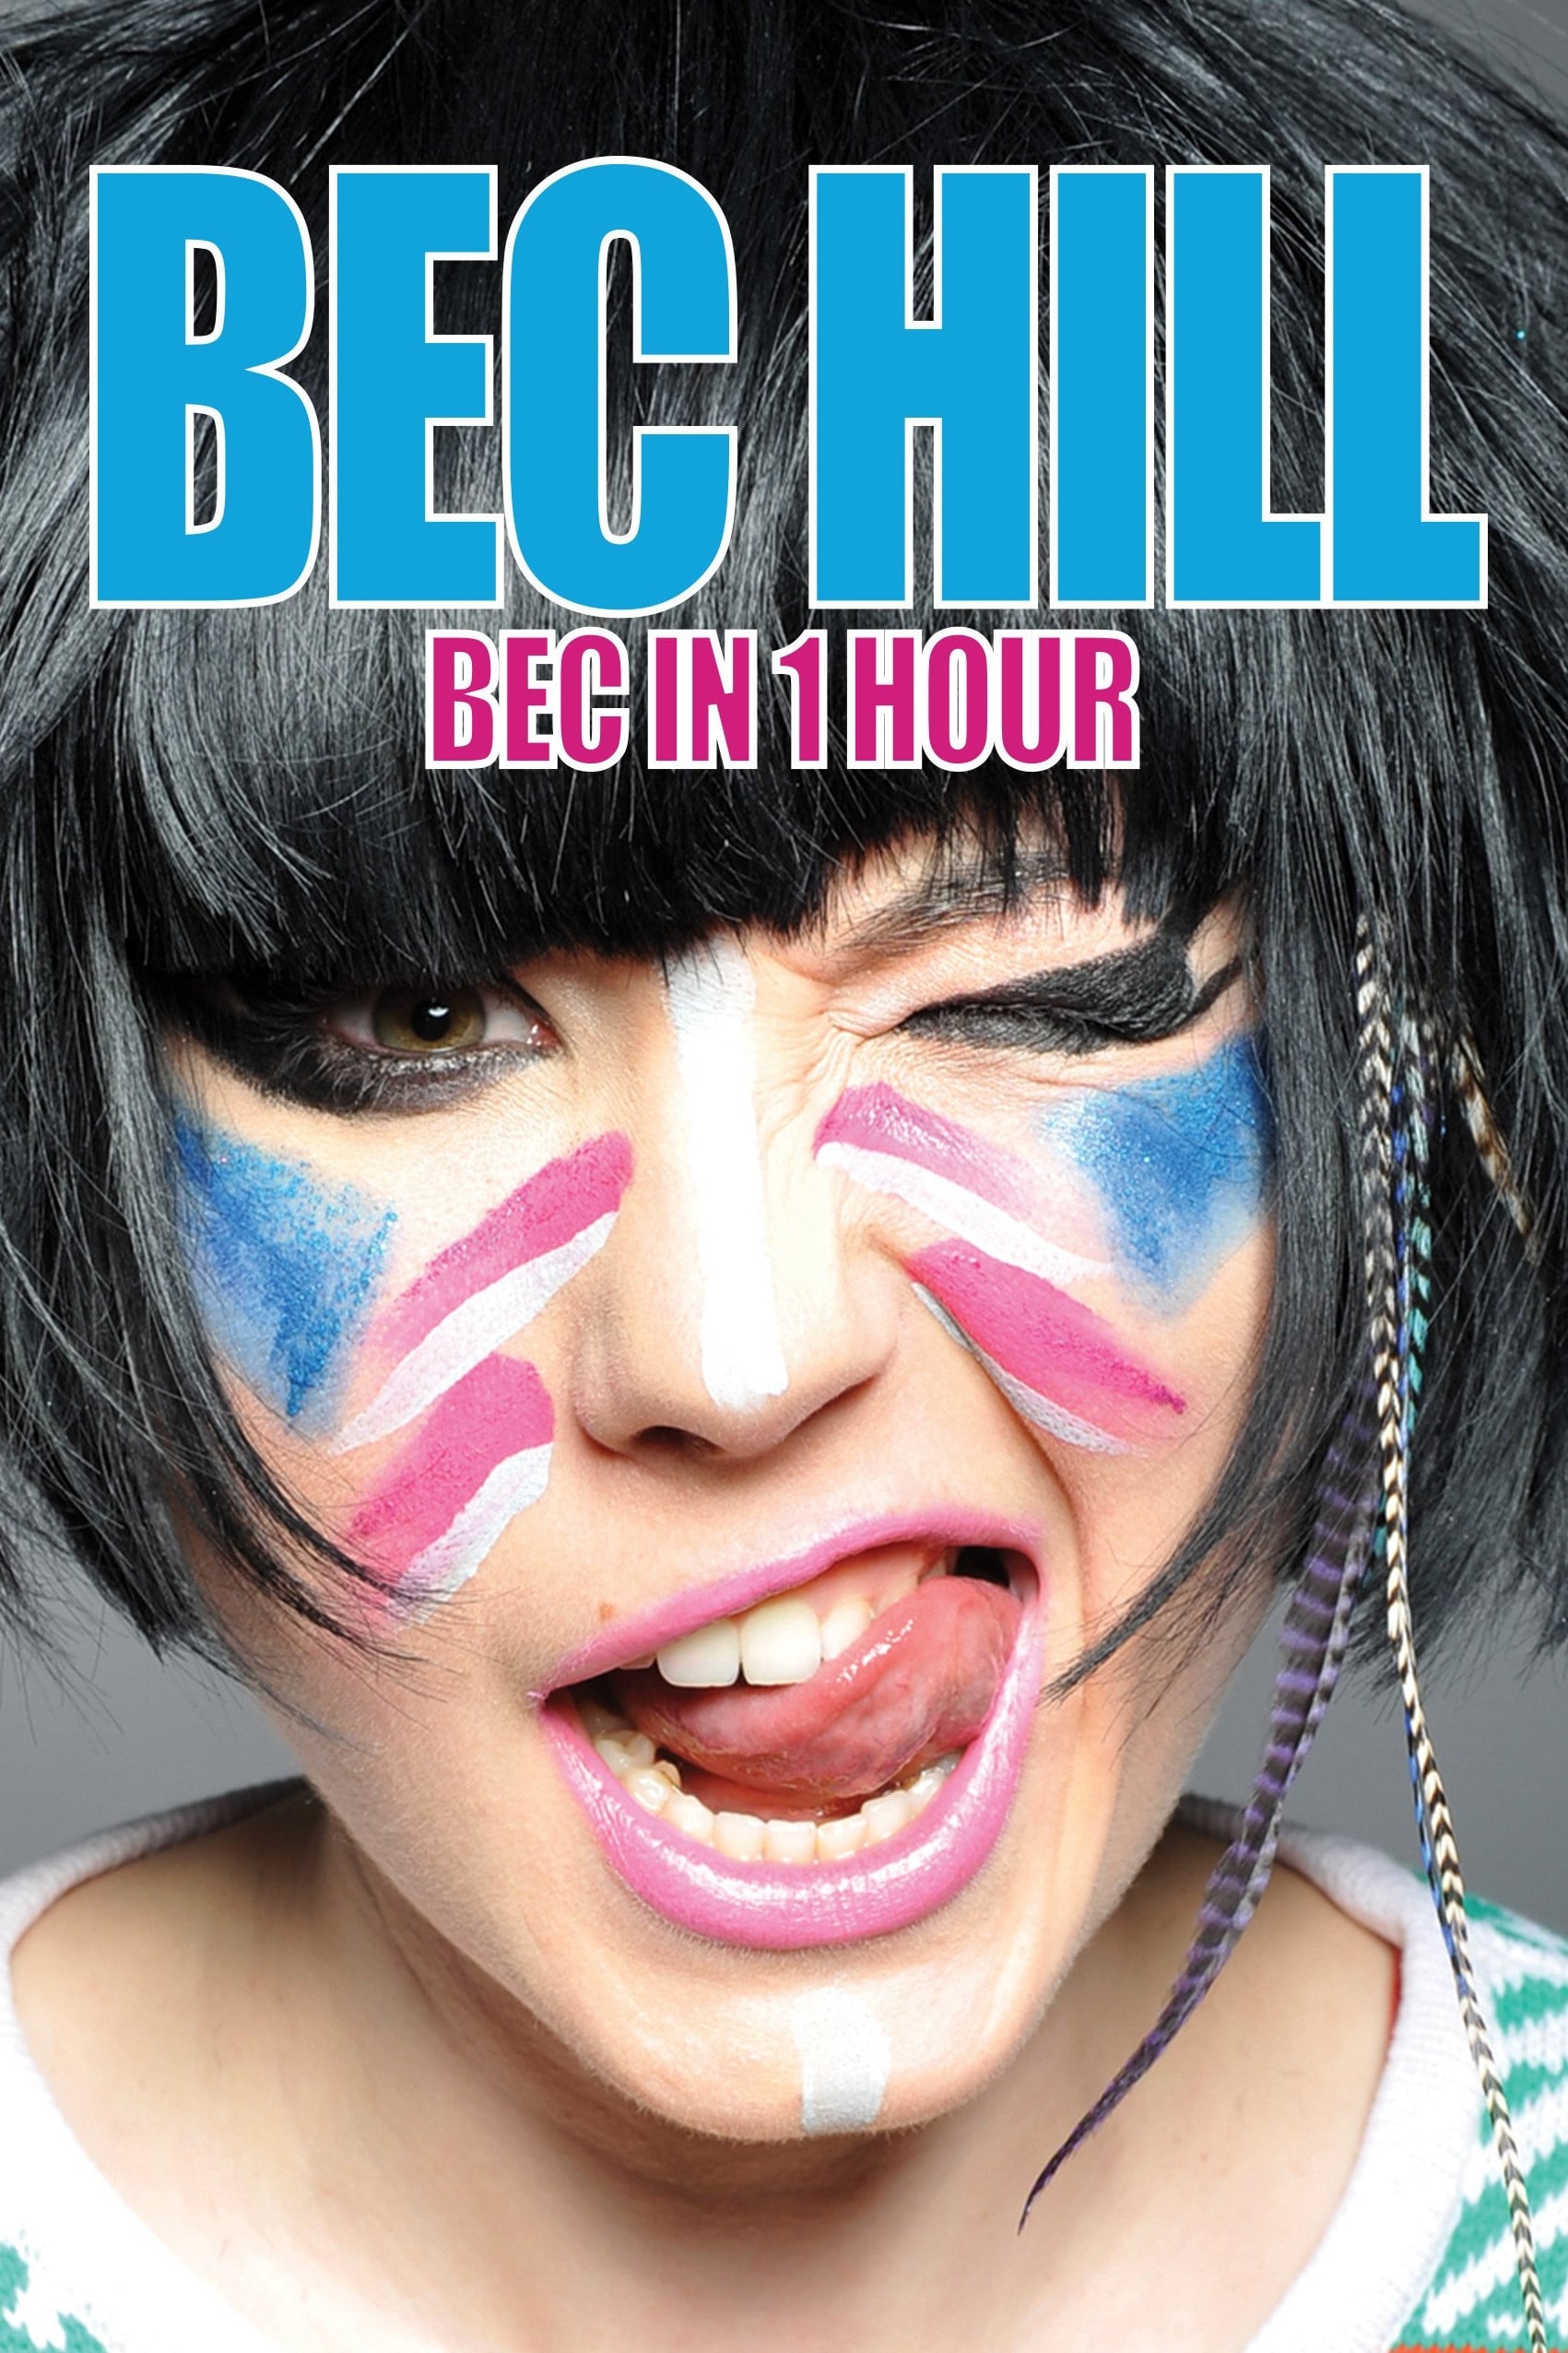 Bec Hill: Bec in 1 Hour